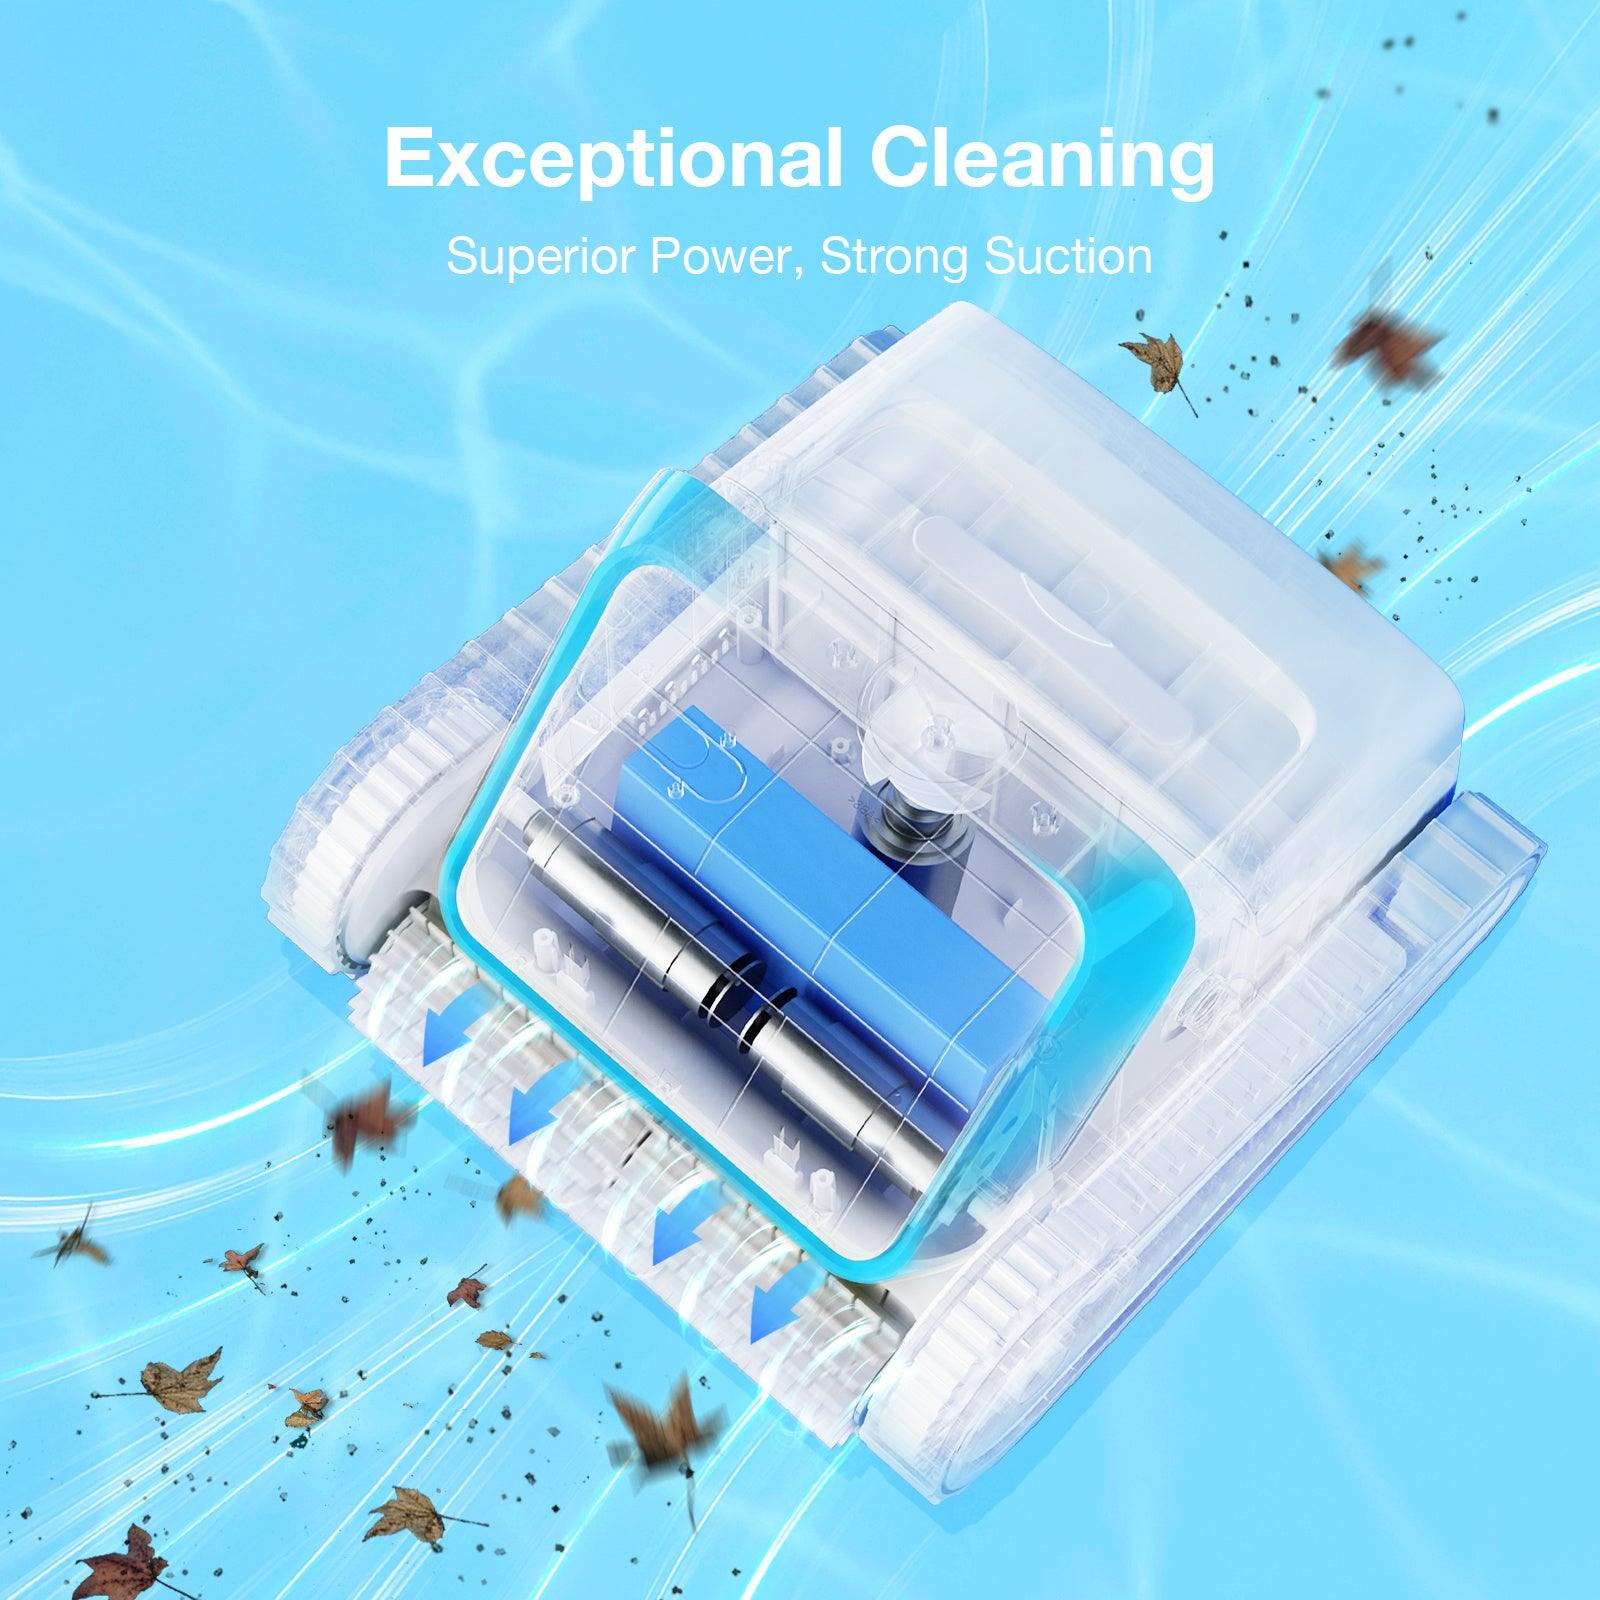 LAZYBOT P01 Cordless Robotic Pool Cleaner – Automatic Wall Climbing Pool Vacuum Cleaner, Smart Navigation, Self-Parking, Lasts 150 Mins with 130W Suction Power, Ideal for In-Ground Pools up to 2500 ft² - Lazy Pro